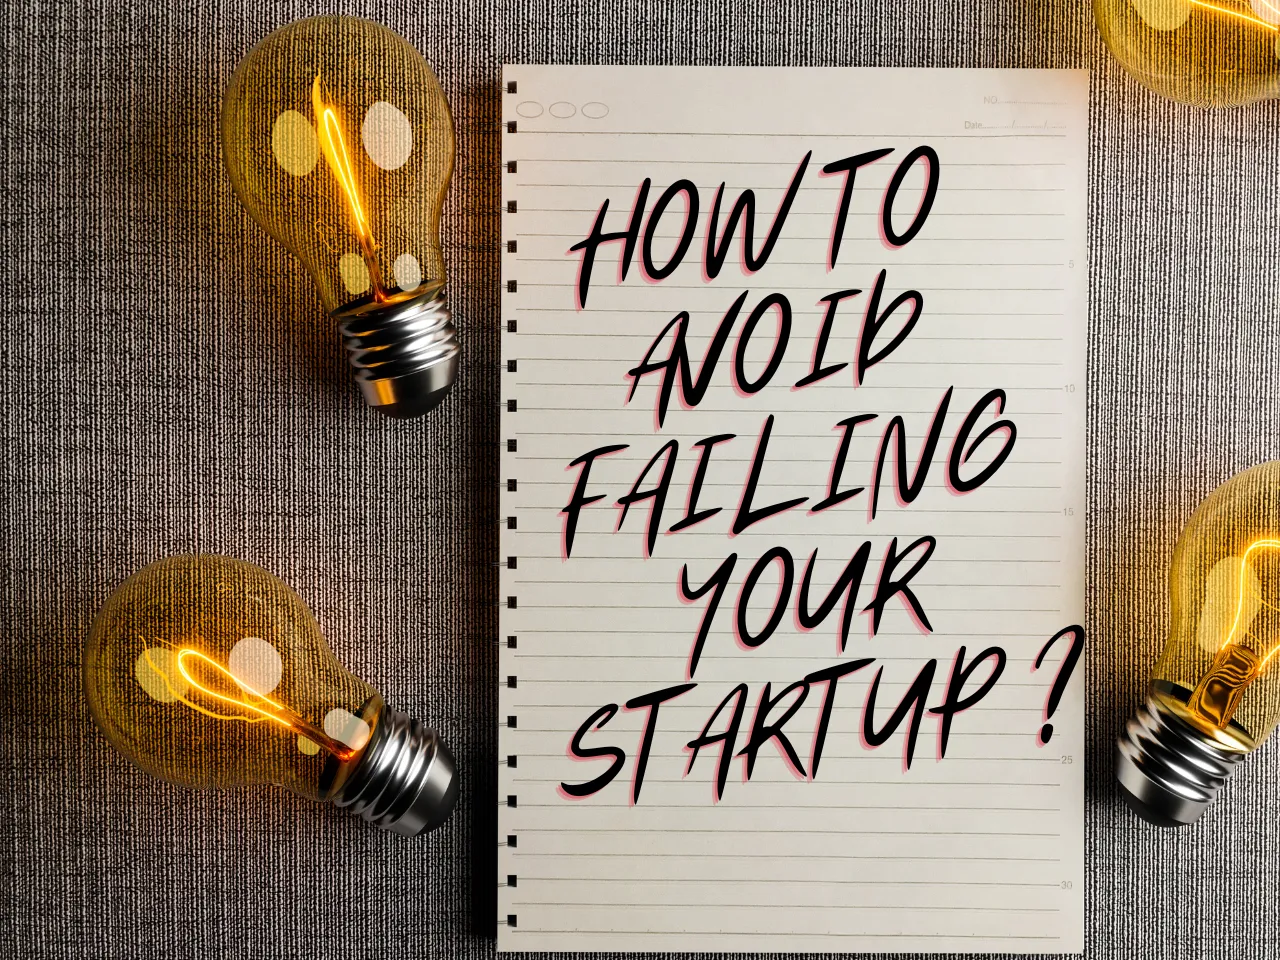 Startup Failure Rate: 7 Deadly Sins That Can Lead Your Startup Idea to Failure